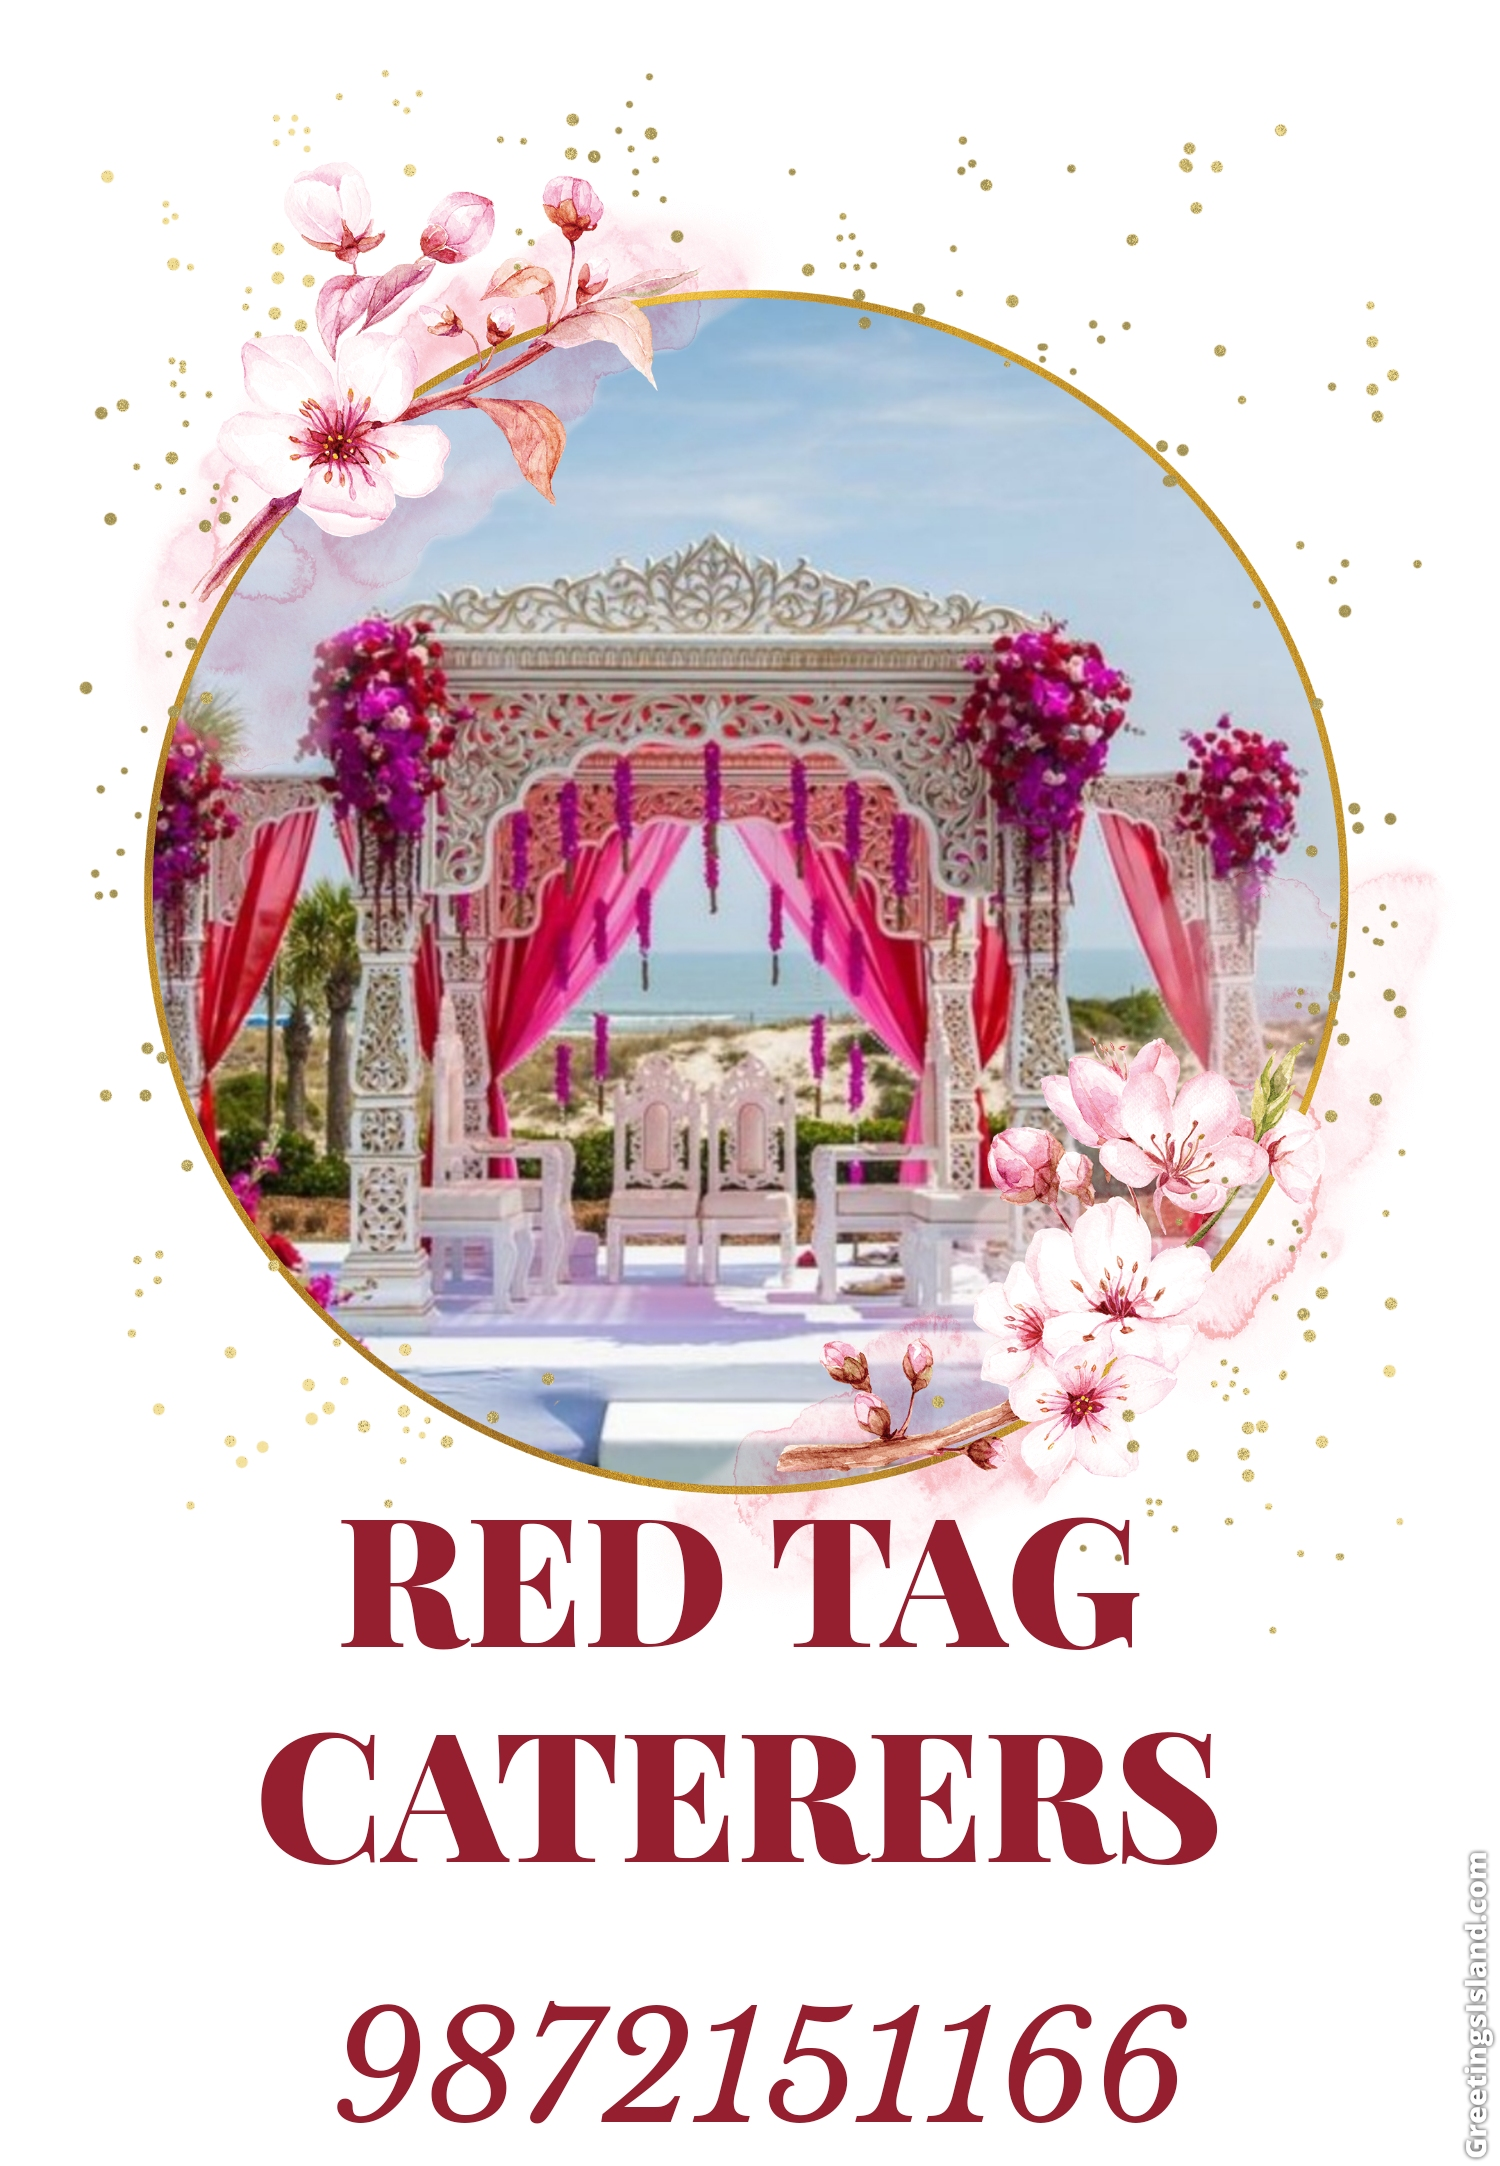 Cost effective wedding planner in Mohali  | Red Tag Caterers | Cost effective wedding planner in Mohali, best wedding planner in Mohali, Top one wedding planner in Mohali, luxury wedding planner in Mohali  - GL68007